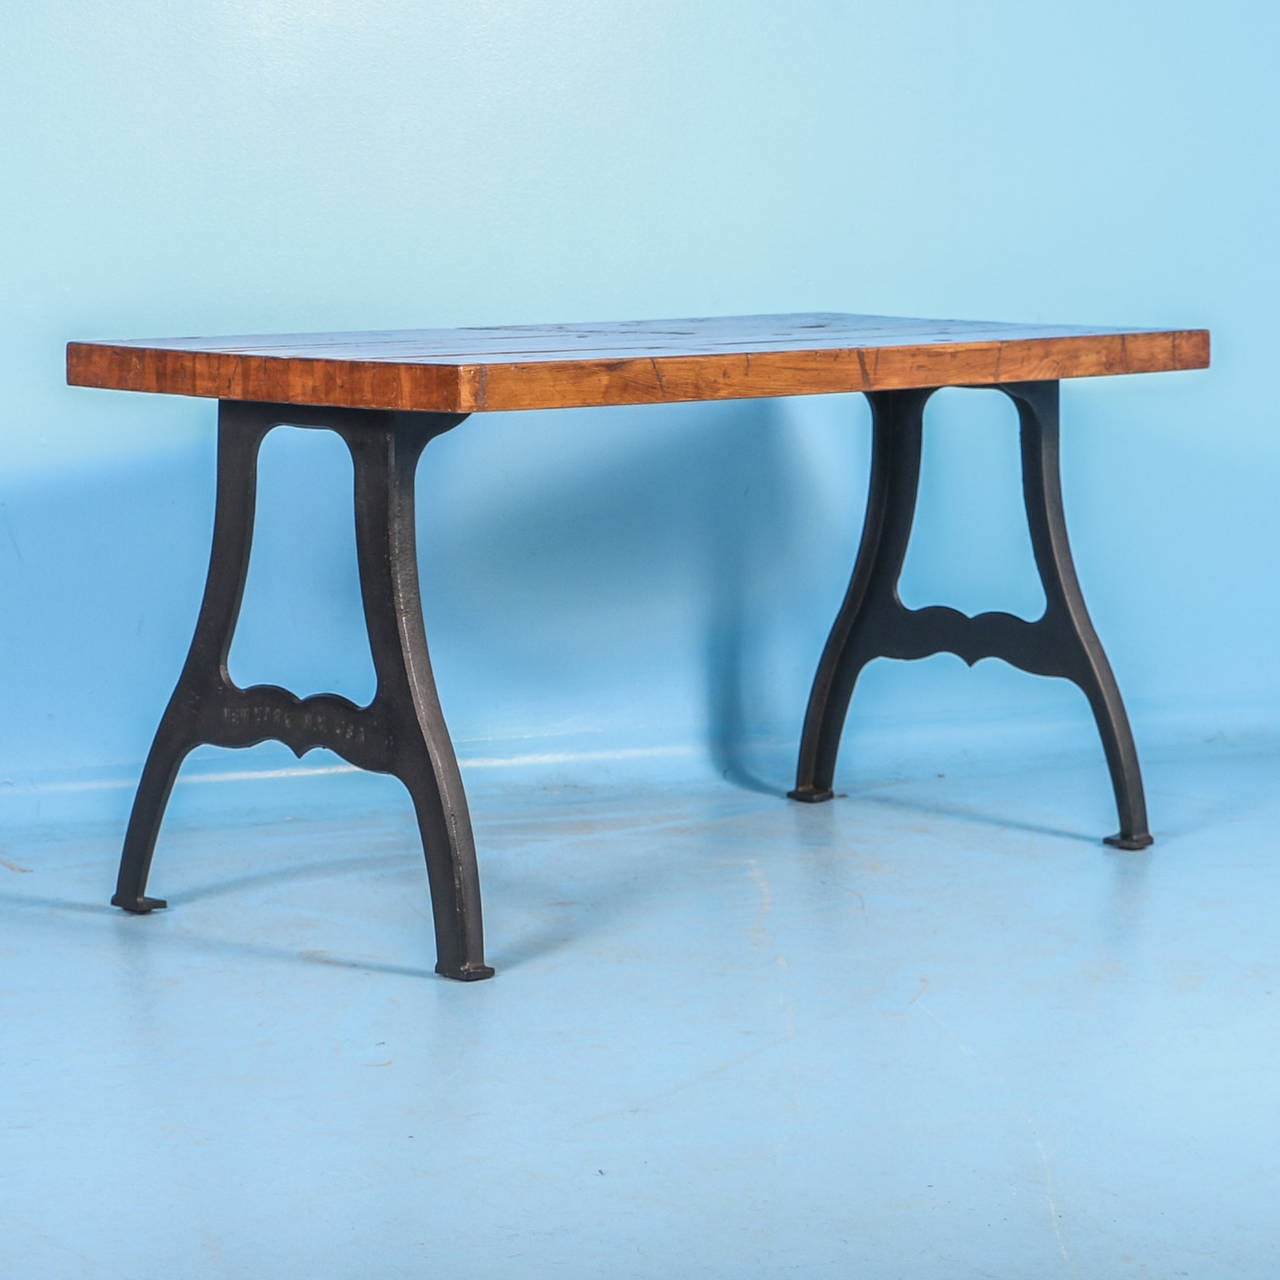 The strong visual appeal of this writing table table comes from top, made from  reclaimed railroad cart wood revealing countless years of use. The boxcars were used in the early 1900's in the US. The heavy cast iron base is a great contrast to the